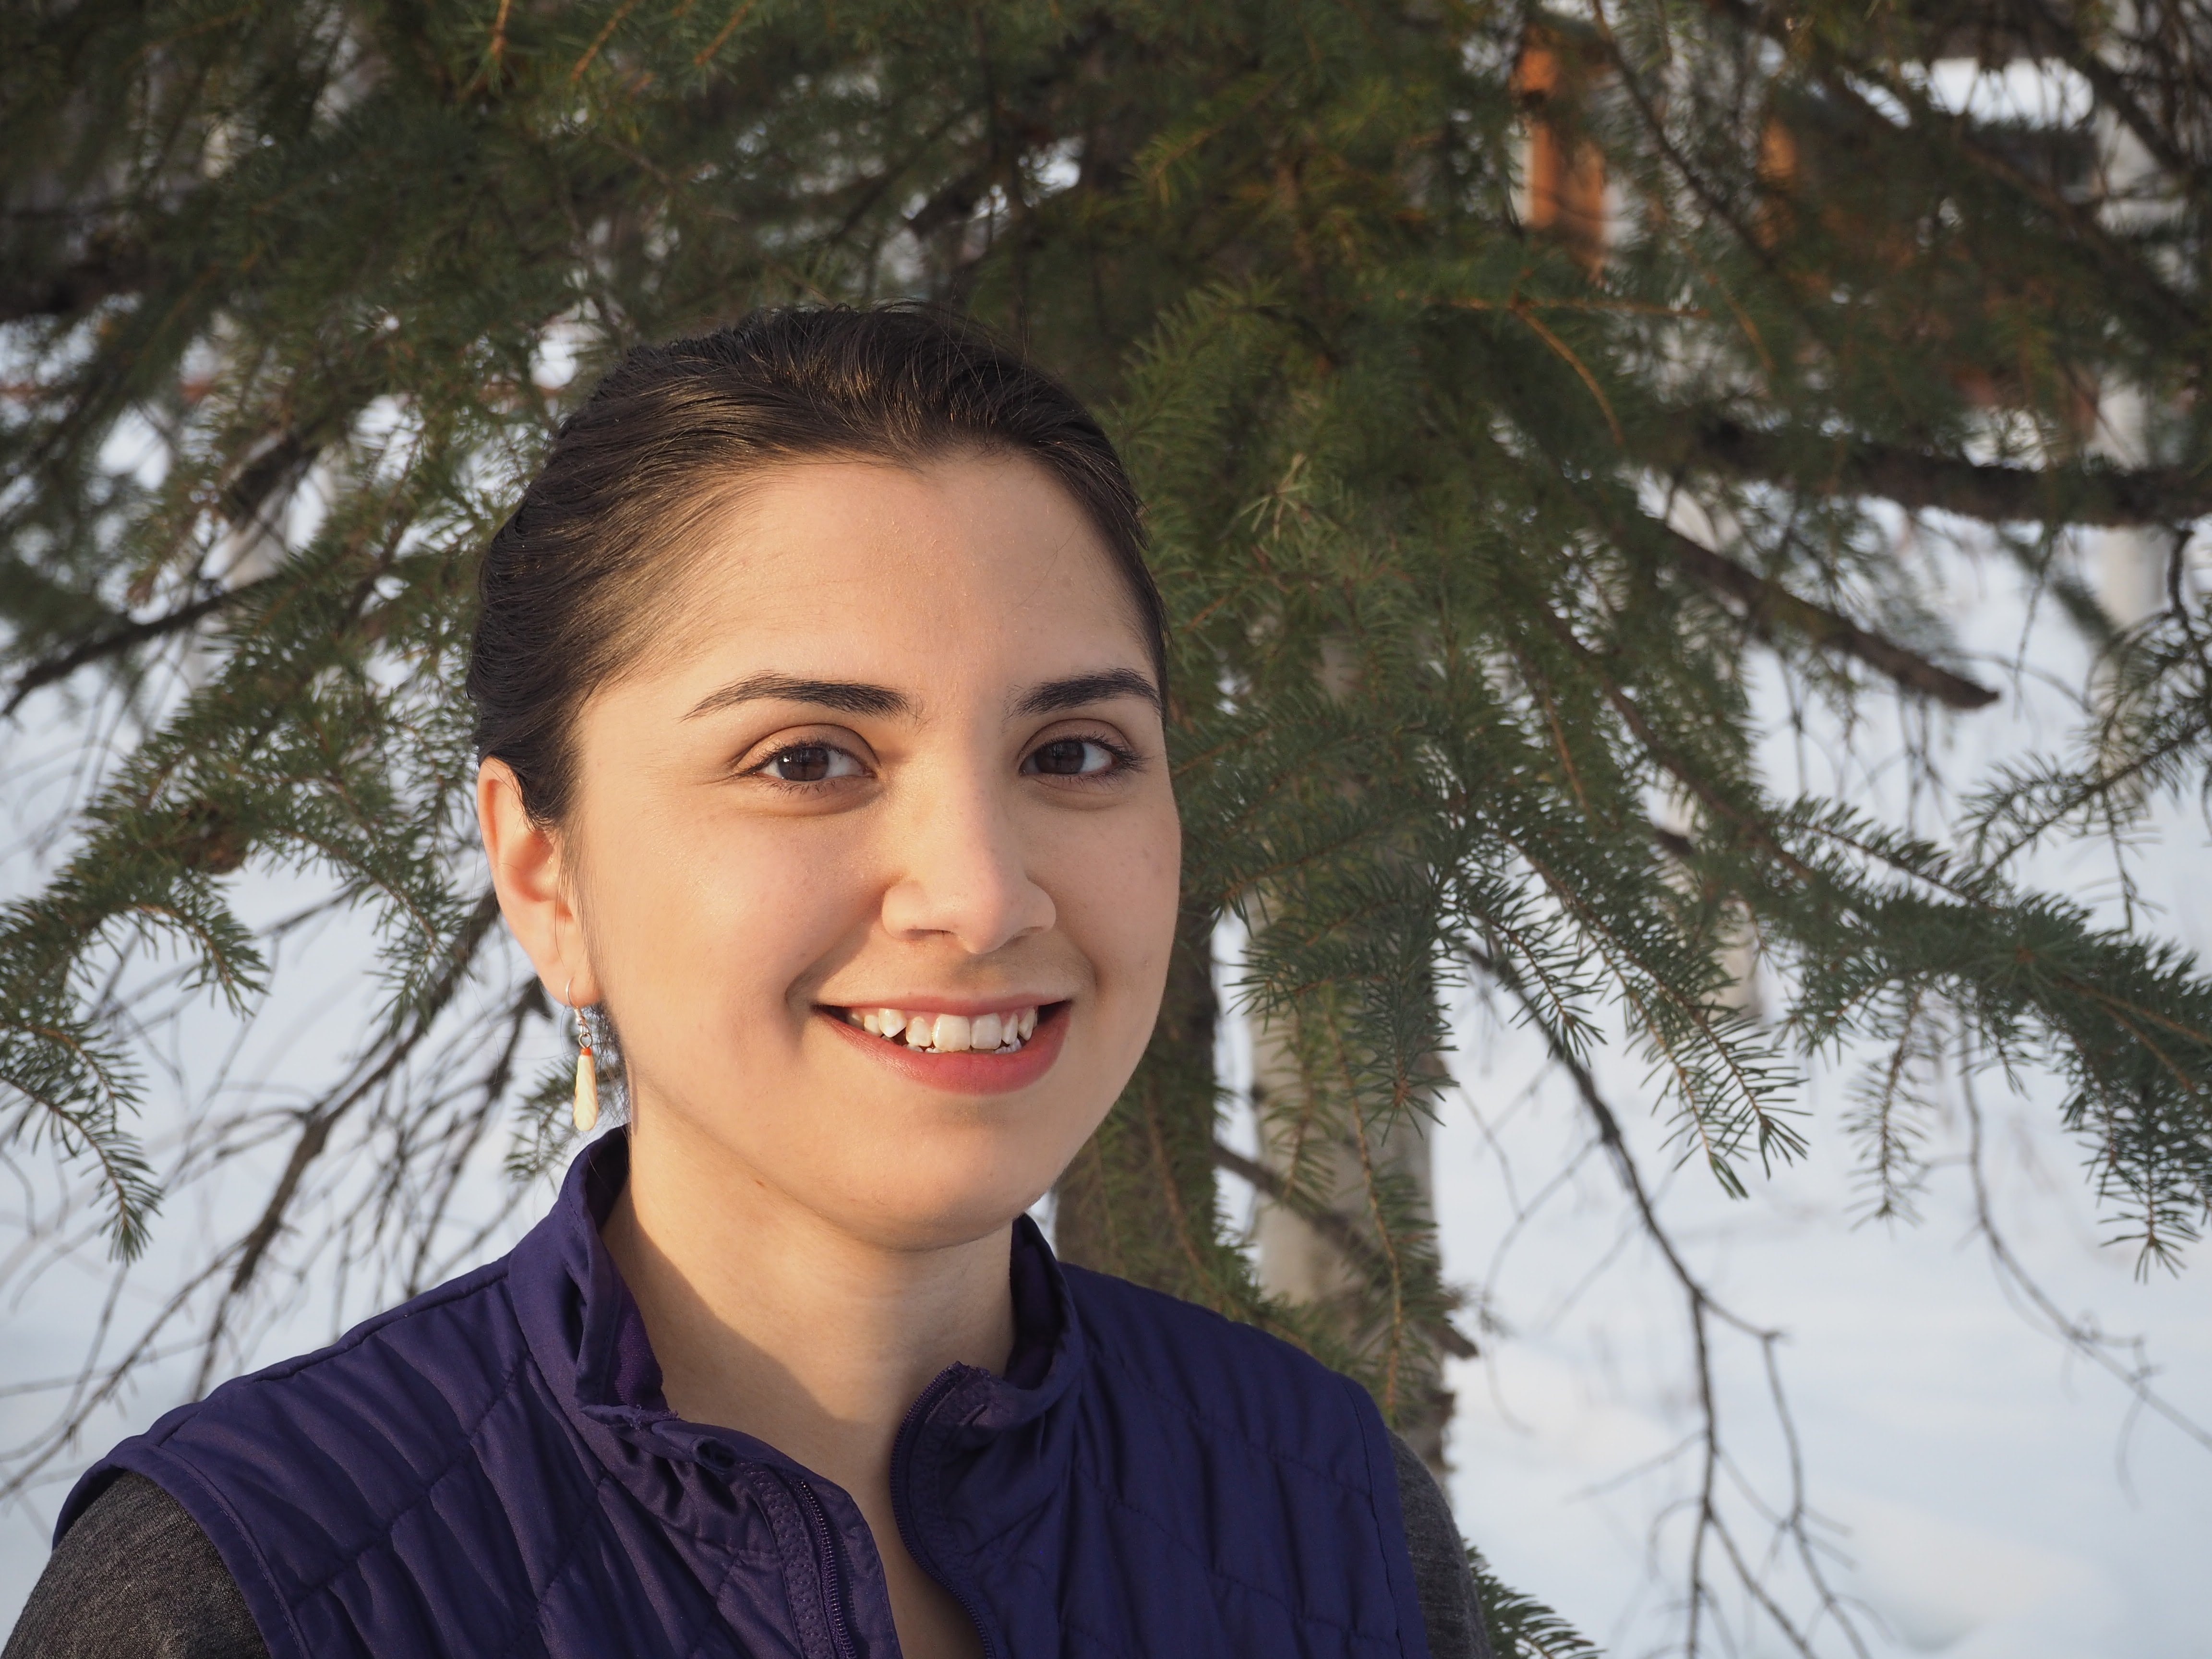 Chelsey Qaġġun Zibell is a master’s candidate and adjunct faculty member at University of Alaska Fairbanks School of Education. She’s originally from Norvik and grew up hearing Inupiaq. (Photo courtesy of Chelsey Qaġġun Zibell.)